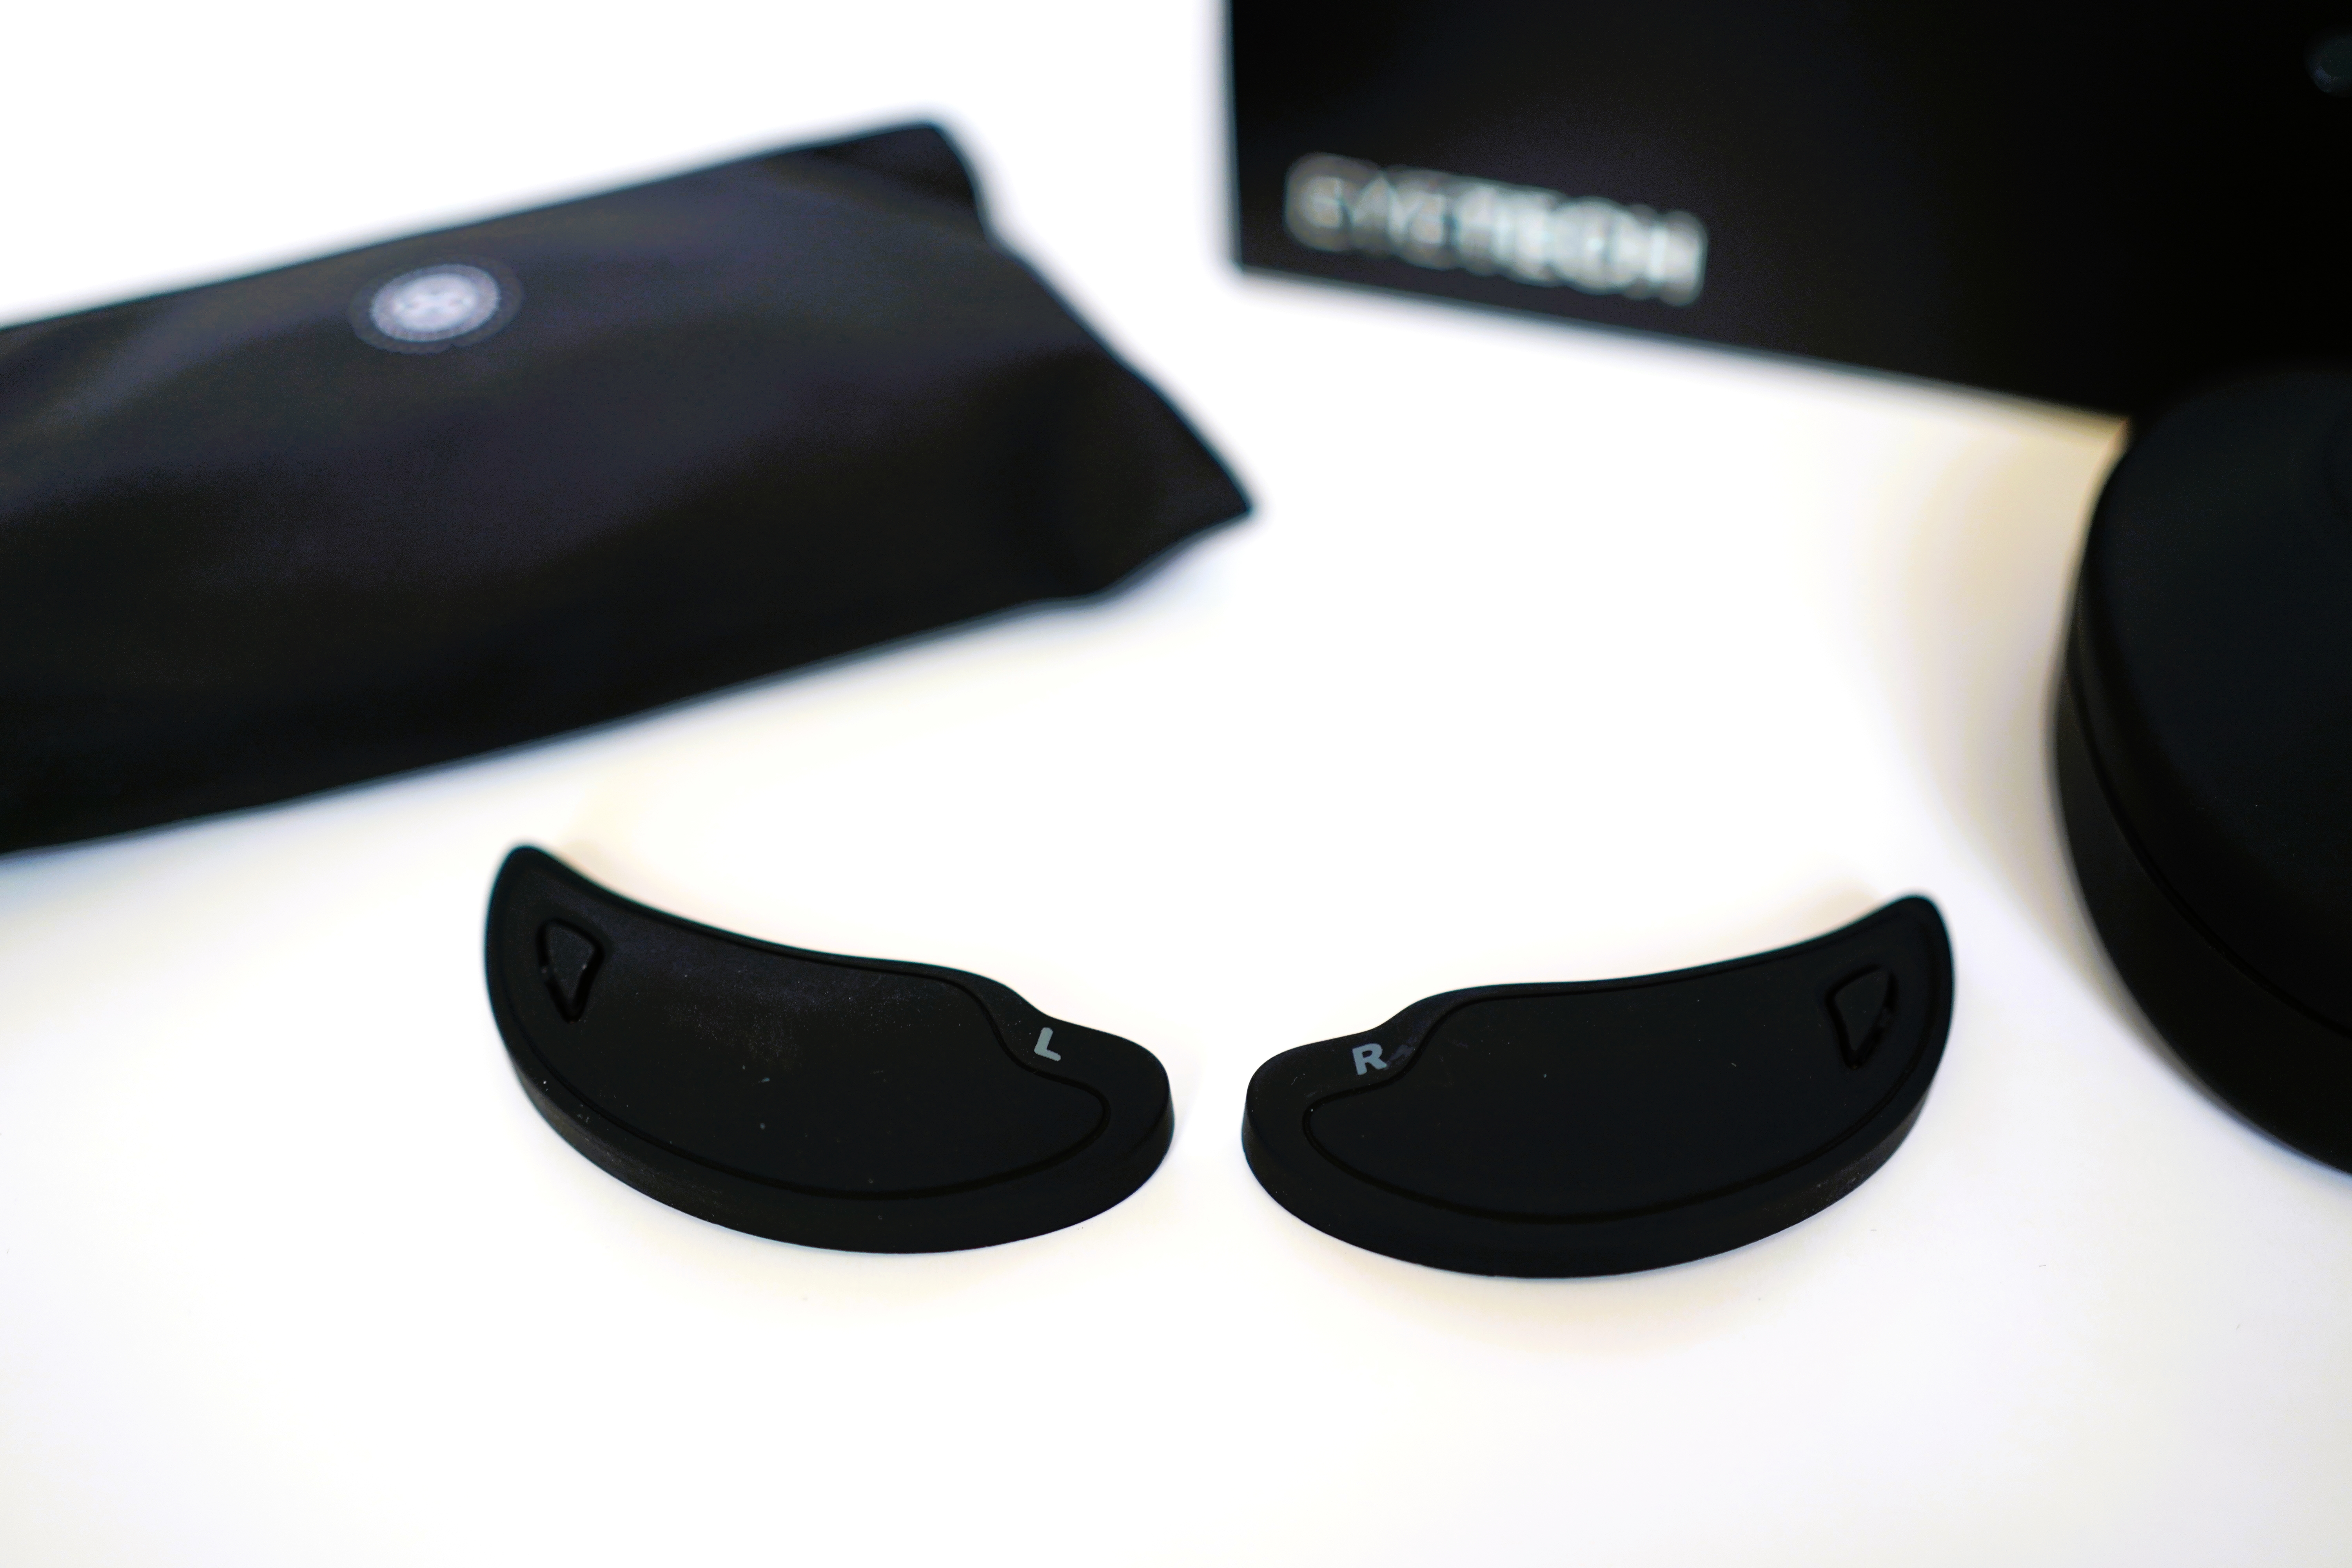 Eyetech by Space Touch Review